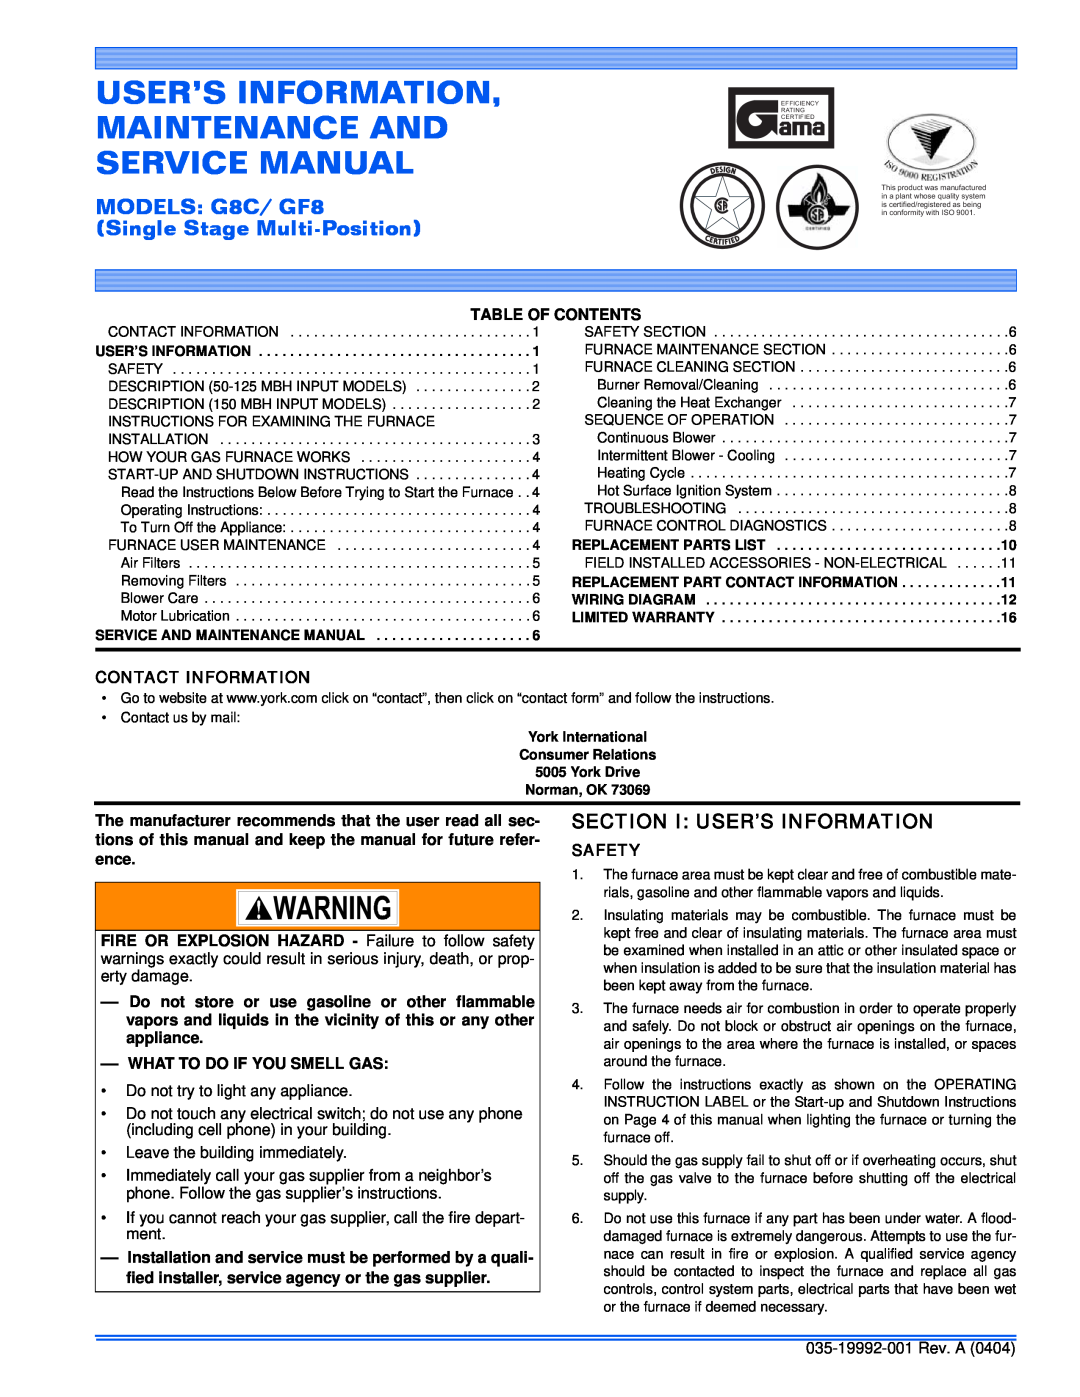 York G8C service manual Section I User’S Information, Table Of Contents, Contact Information, What To Do If You Smell Gas 